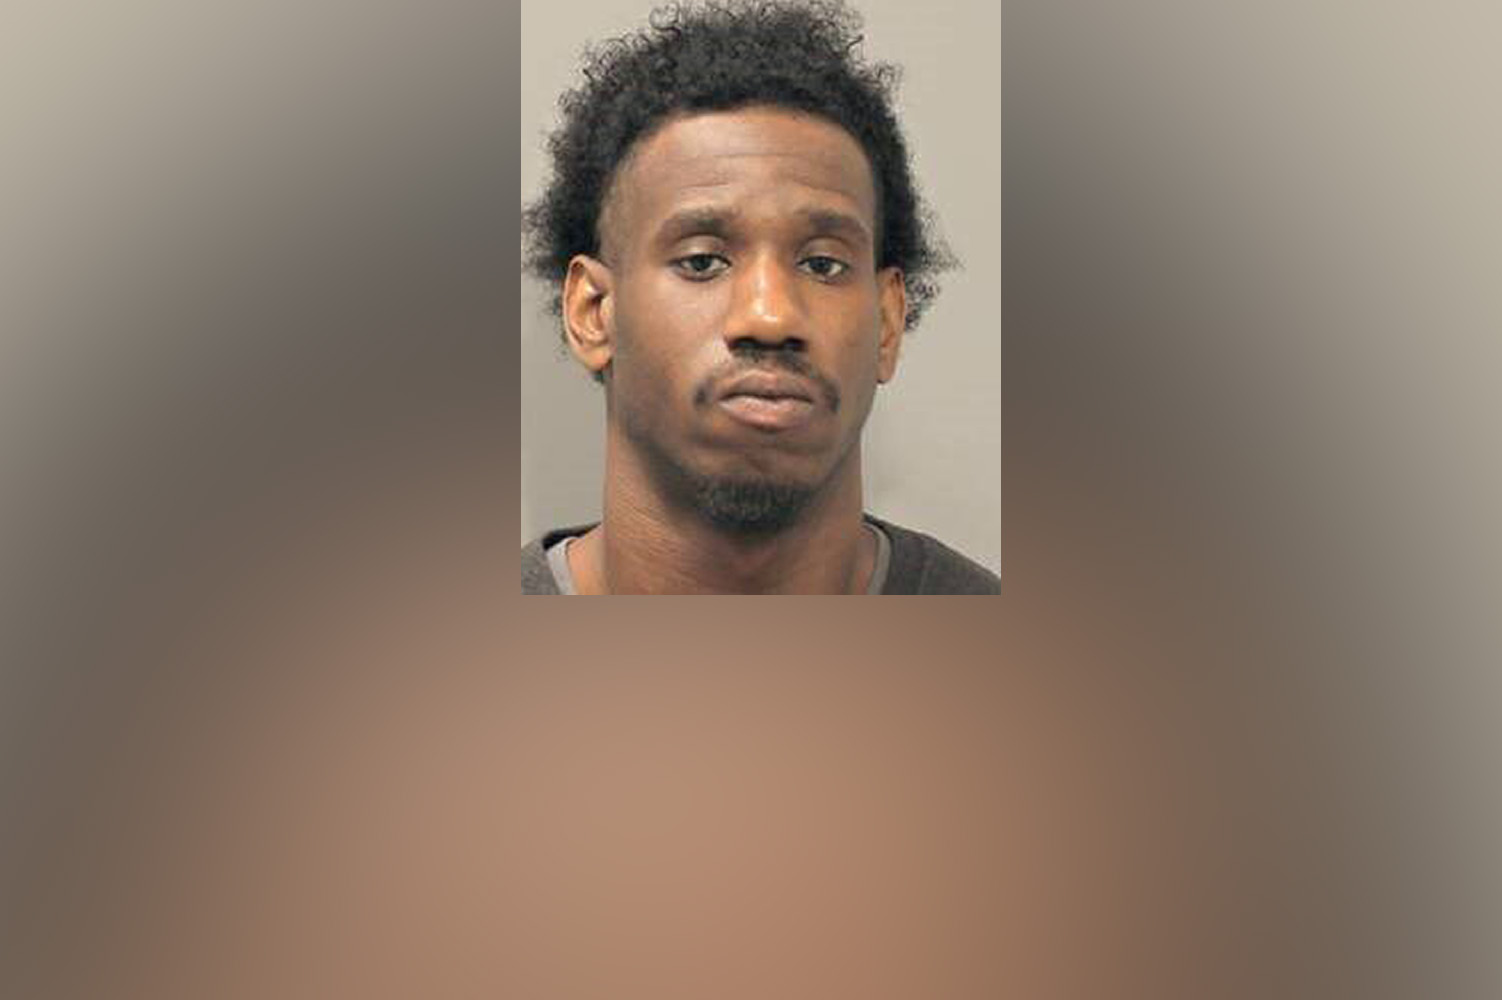 PHOTO: Photo released by the Houston Police shows Brandon Jay Carter, 28, who is being sought for aggravated sexual assault and may be responsible for multiple additional cases.